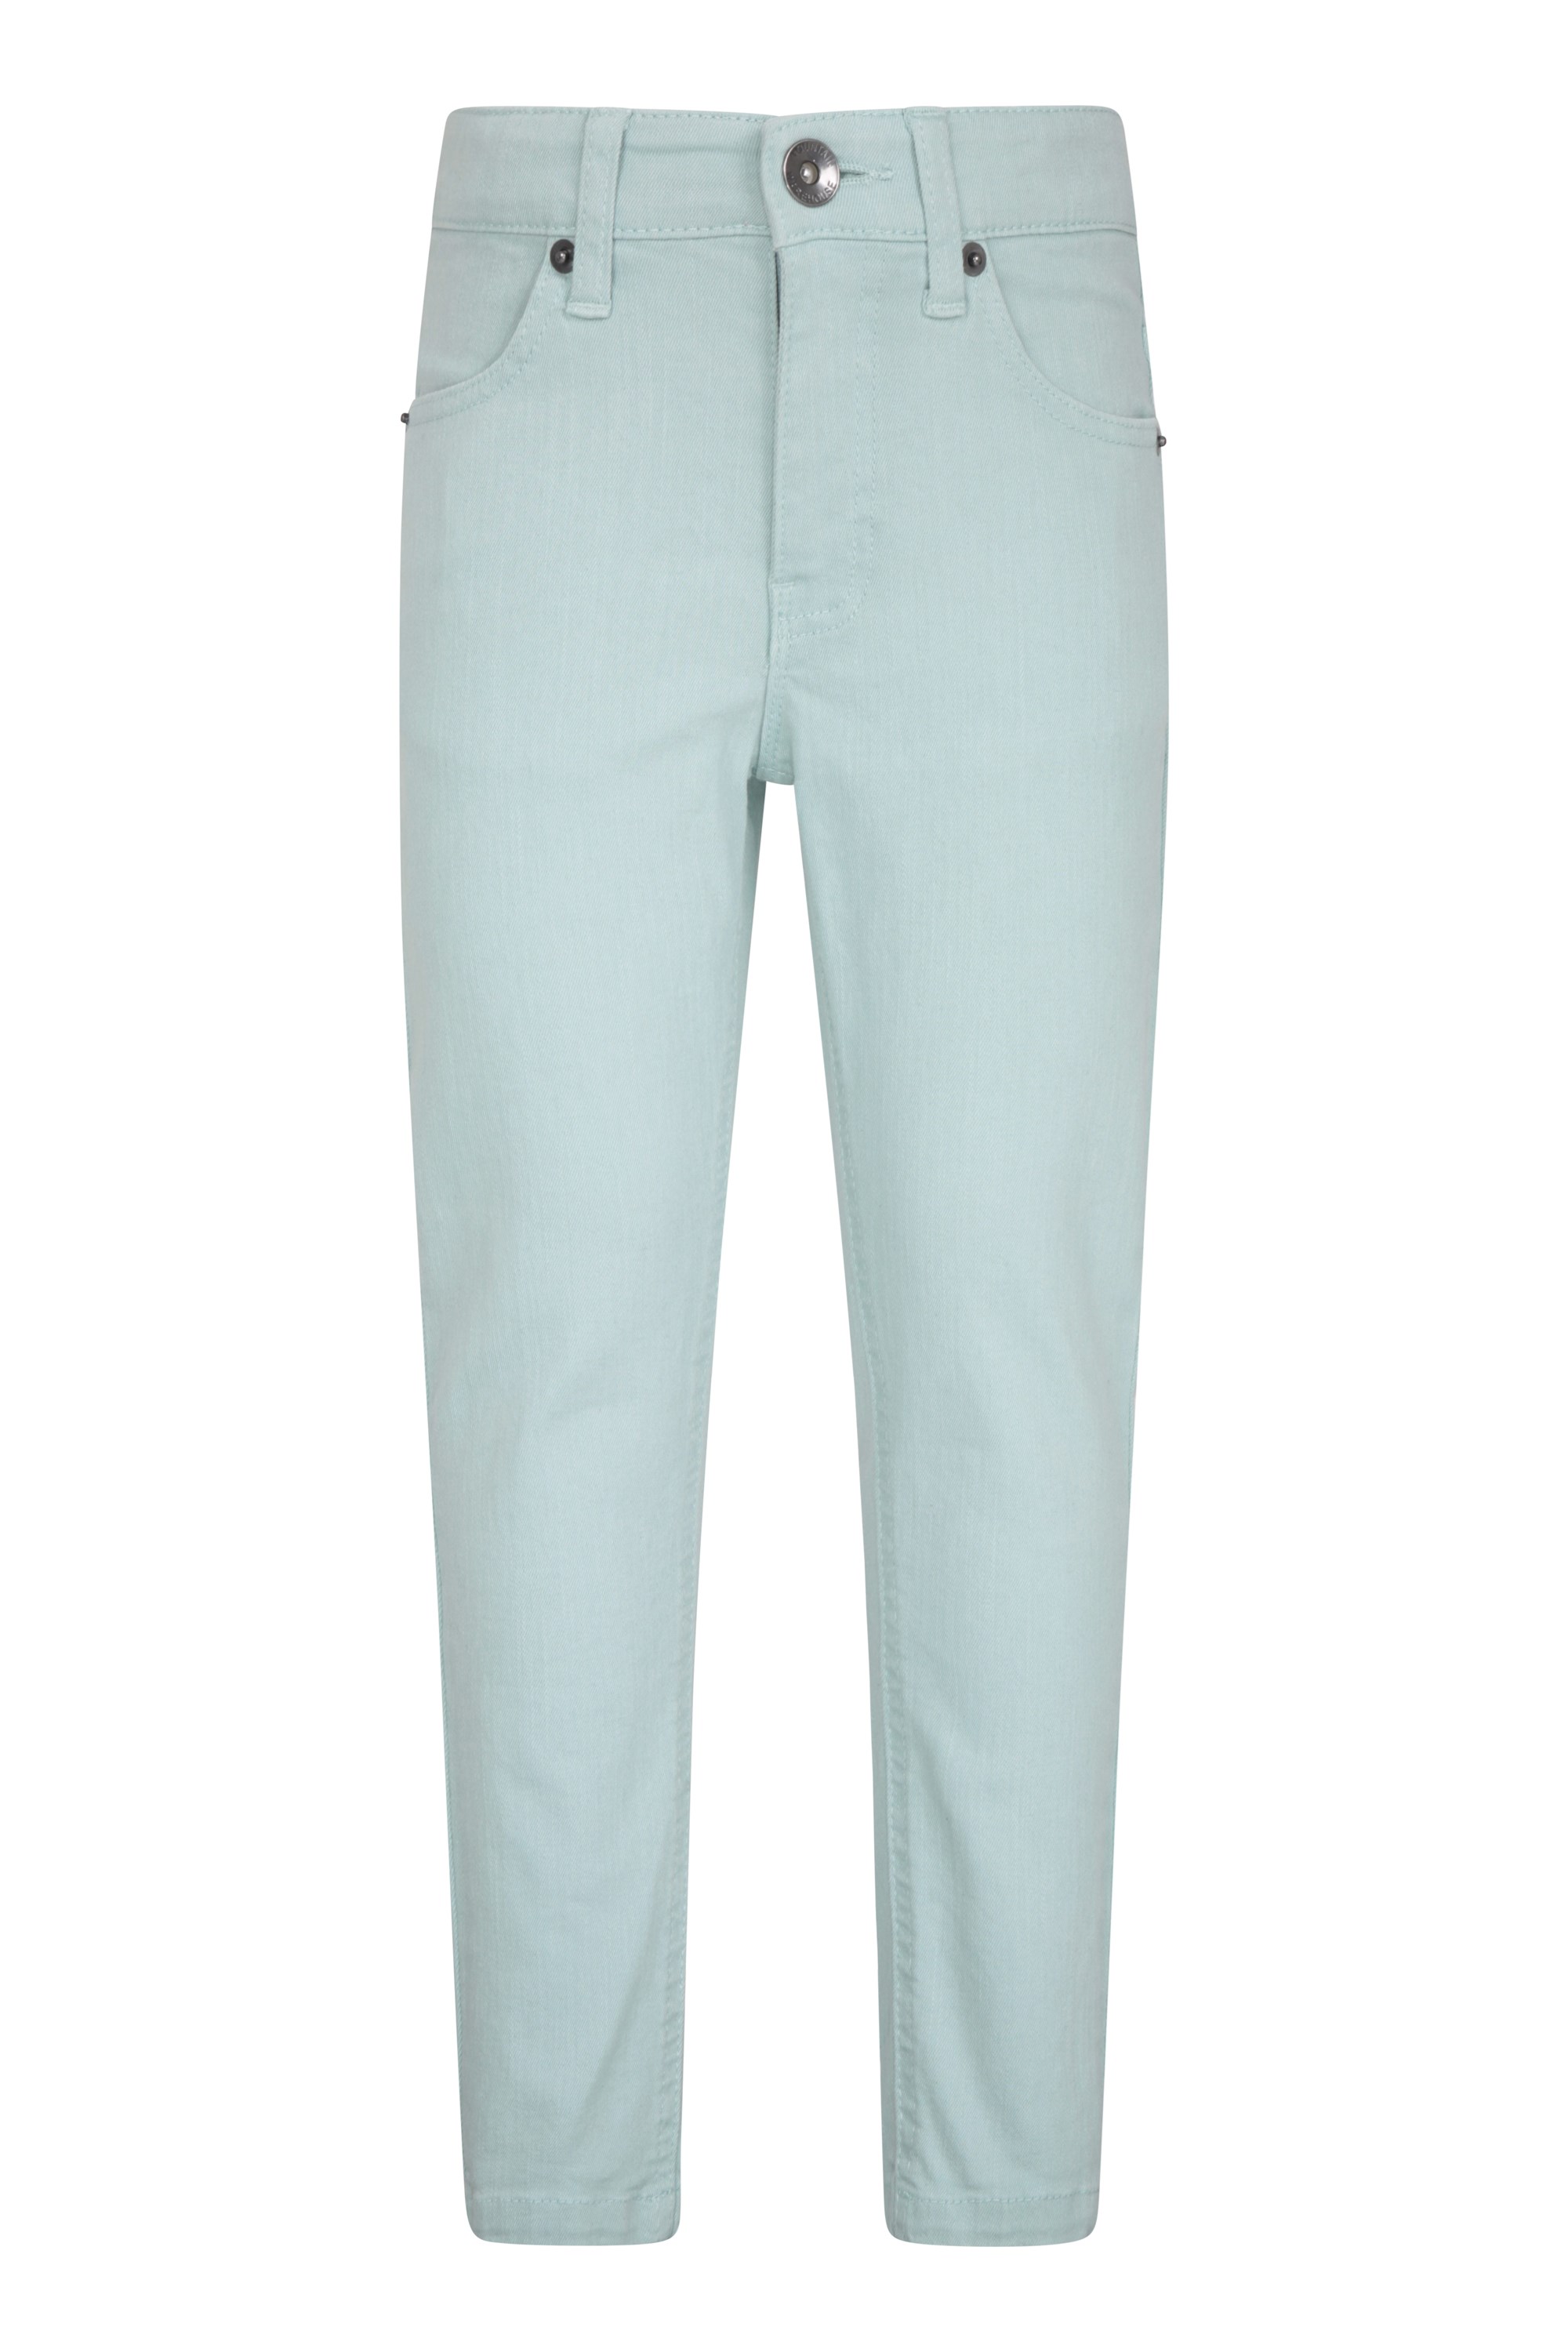 Kids Stretch Casual Trousers - Teal